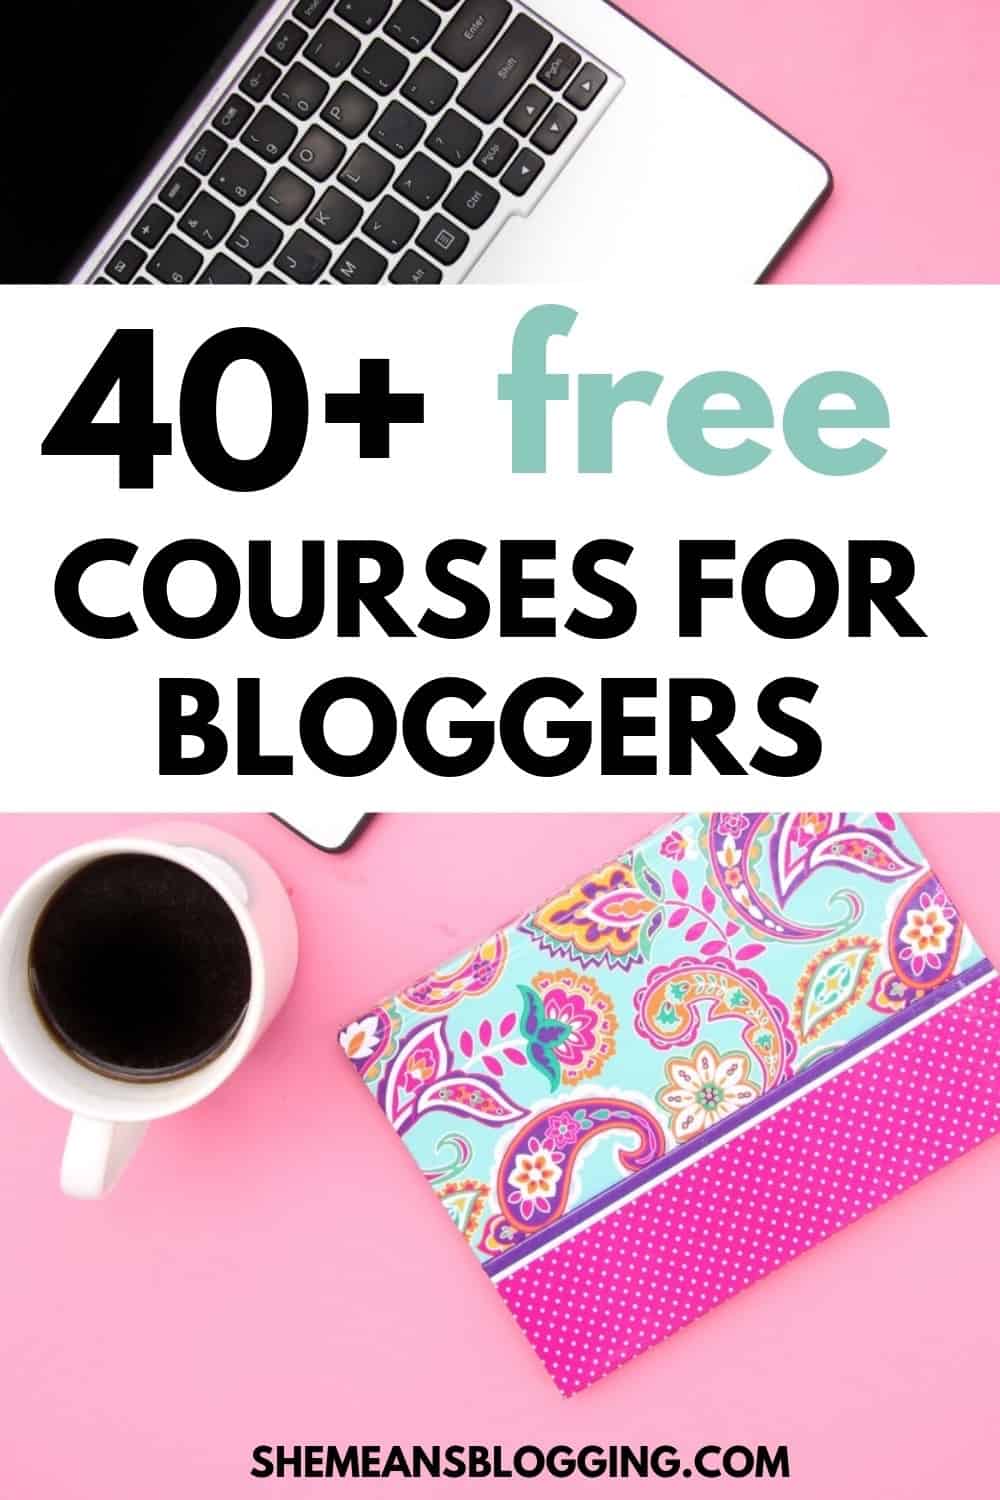 Check out 40+ free online courses for bloggers, and small biz owners! This post has courses on blogging, blog traffic, make money blogging, social media, SEO, photography, email marketing and lots more! Enrol in free courses today. #bloggingresources #blogtips #bloggingtips #socialmedia